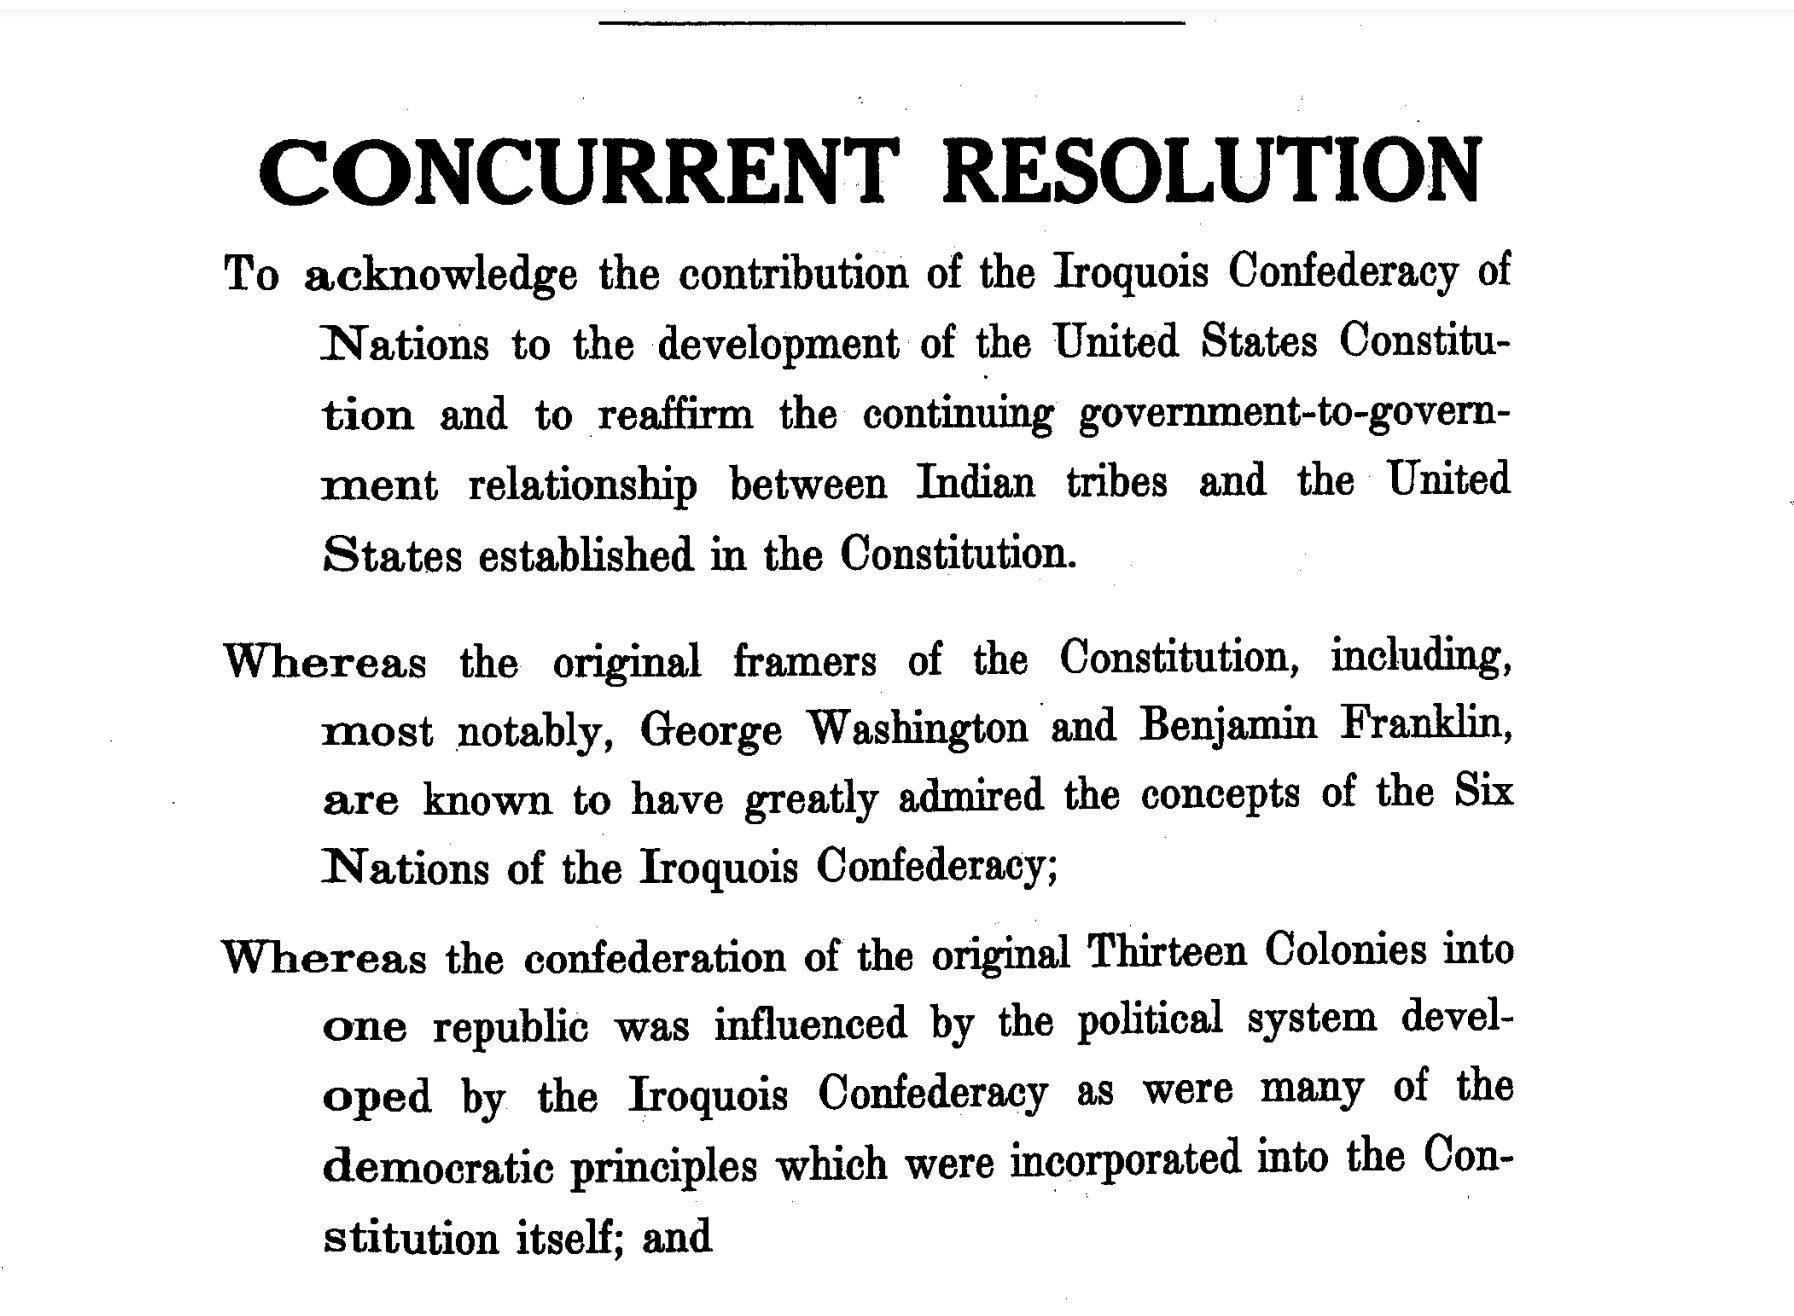 “Concurrent resolution to acknowledge the contribution of the Iroquois Confederacy of Nations…,”H. Con. Res. 331, 100th Cong., 2nd sess., (October 5, 1988), https://www.senate.gov/reference/resources/pdf/hconres331.pdf.